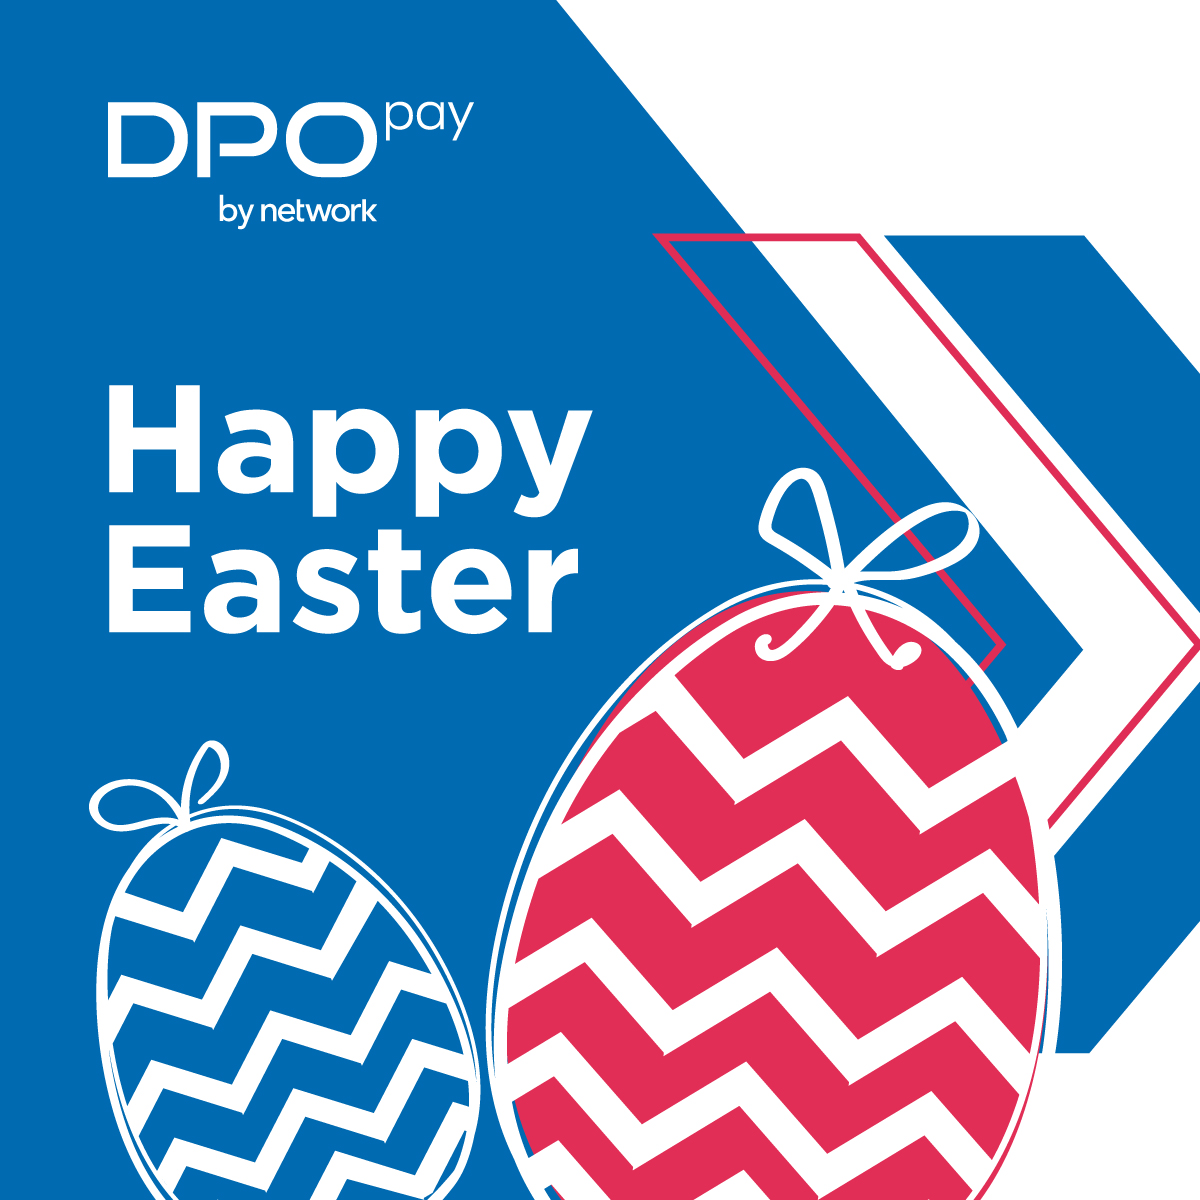 As we celebrate this special time of renewal and hope, let's cherish the moments that bring us closer together. From our DPO Pay by Network family to yours, may your Easter be filled with love, joy, and unforgettable memories. 🐰💖 #DPOPaybyNetwork #HappyEaster #EasterWeekend